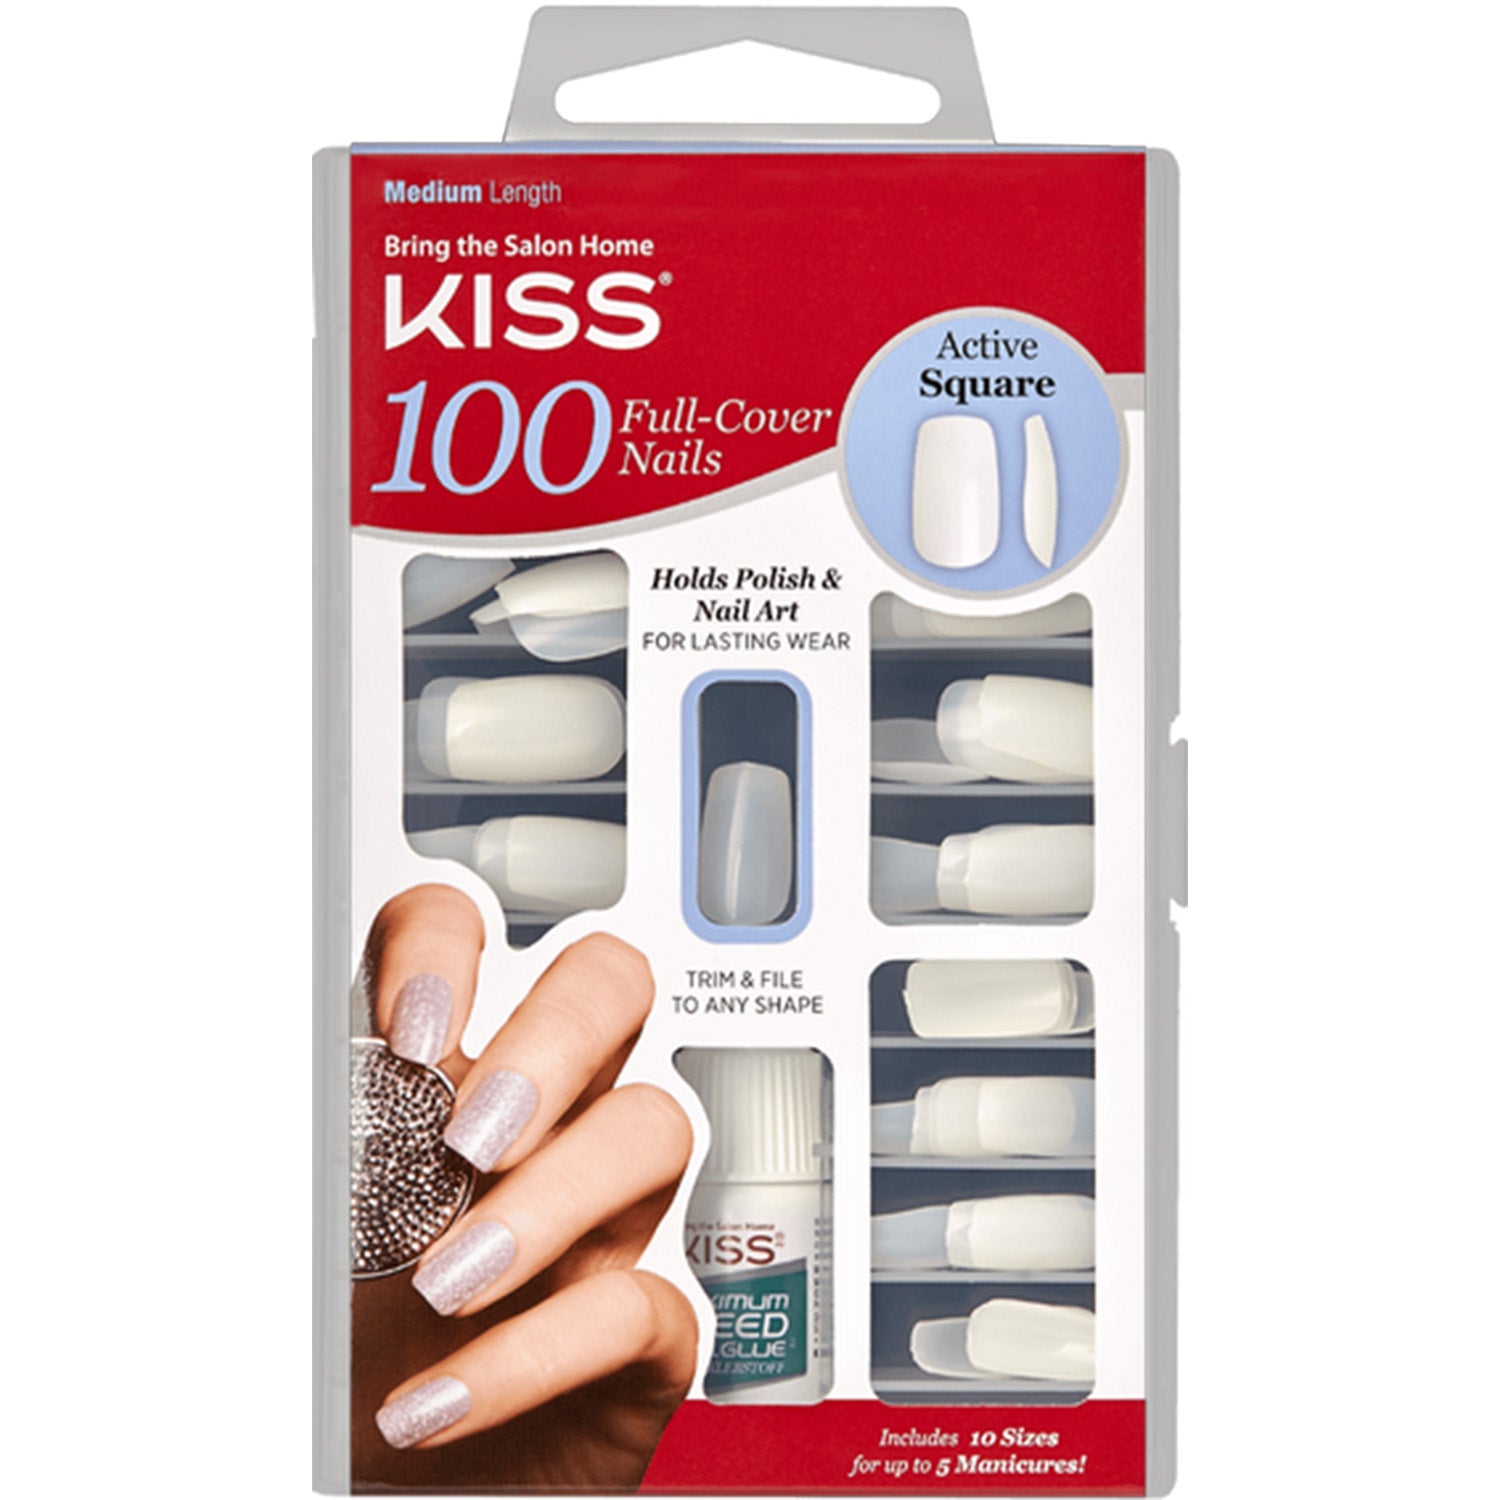 KISS 100 FULL-COVER NAILS ACTIVE SQUARE #100PS12